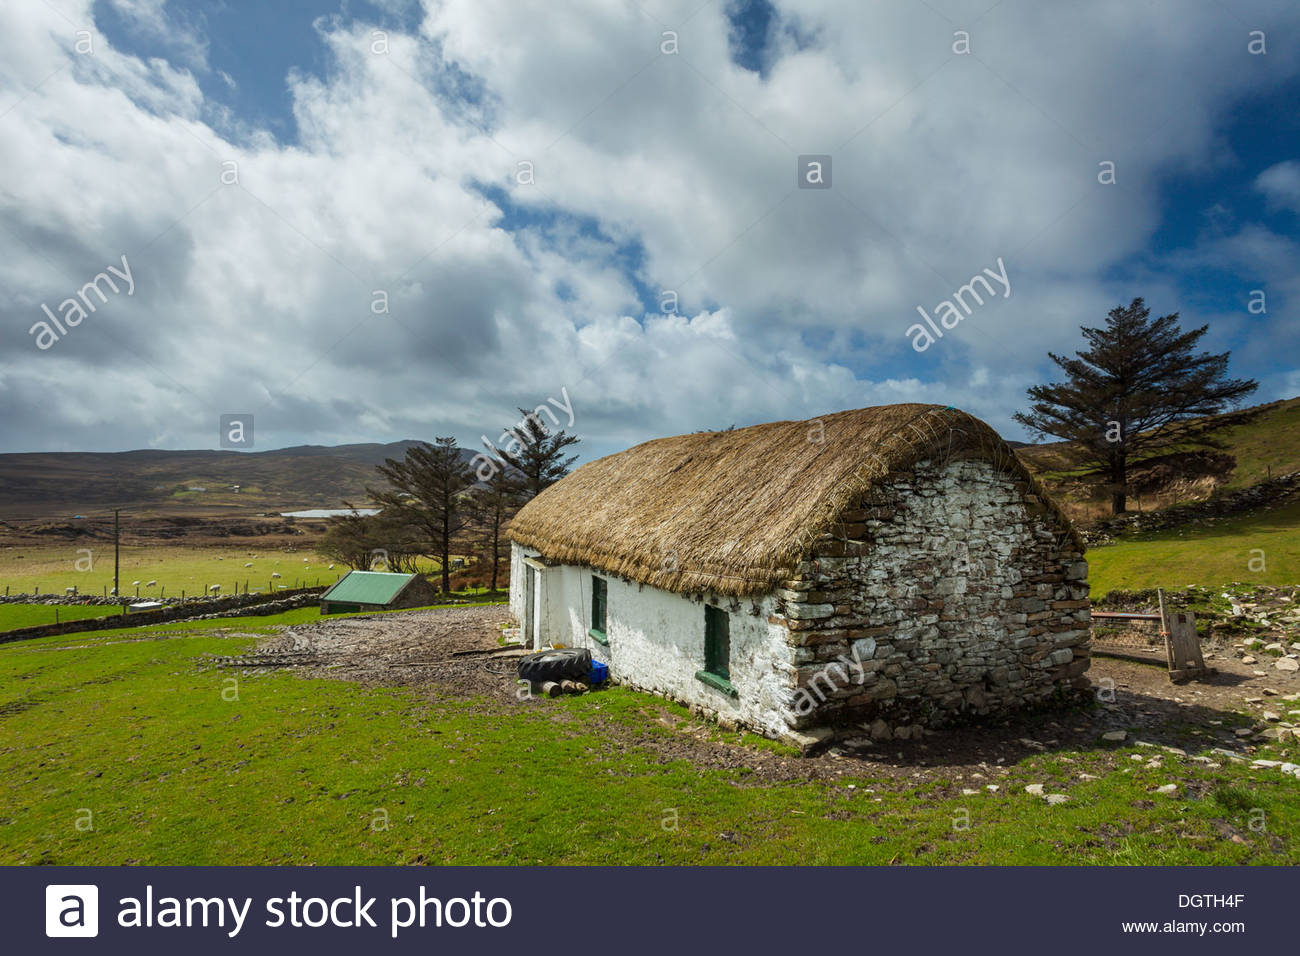 Thatched Cottage Near Straboy County Donegal Ireland Stock Photo